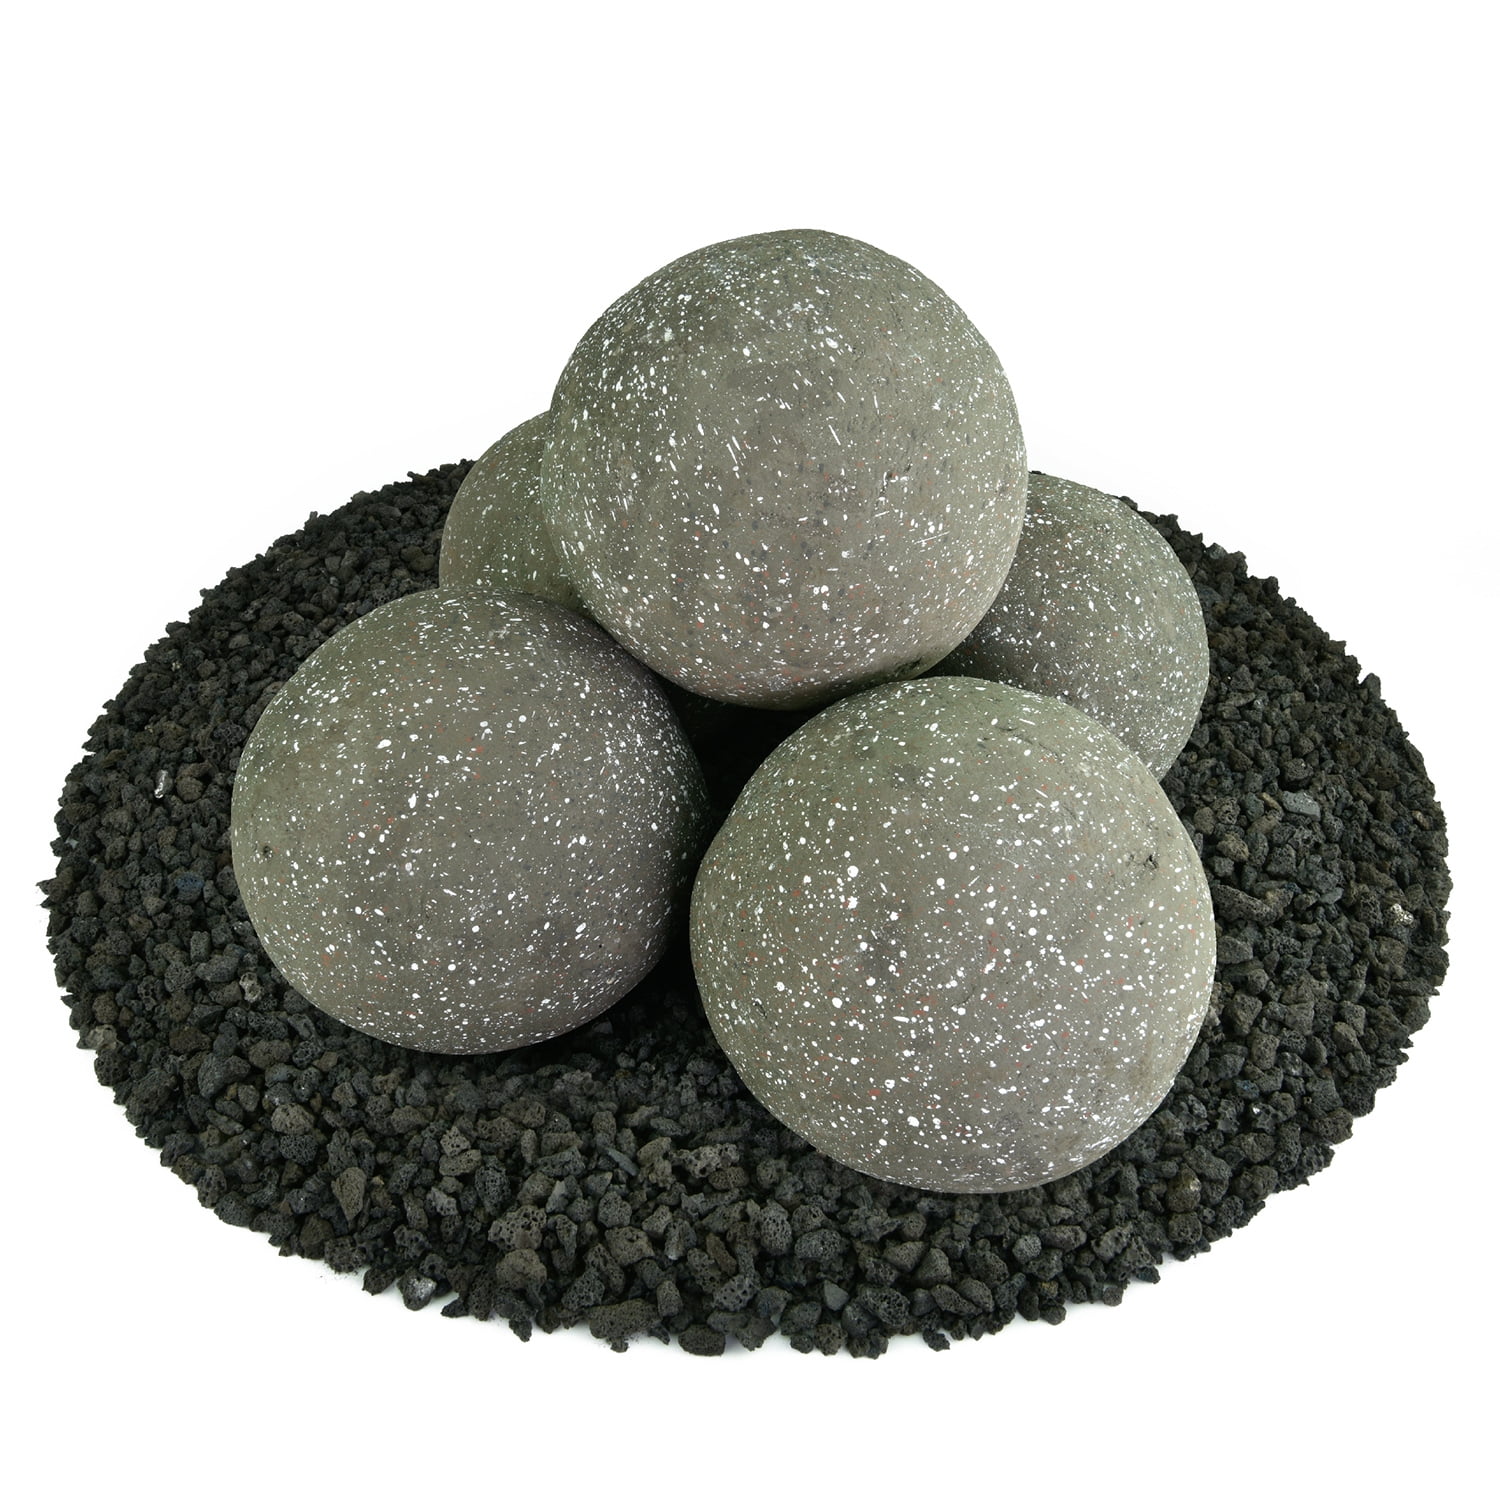 Uniform 3 Lava Rock for Fire Pits Ceramic Spheres for Outdoor and Indoor Use Propane & Gas Fire Pits and Fireplace Ceramic Fire Balls